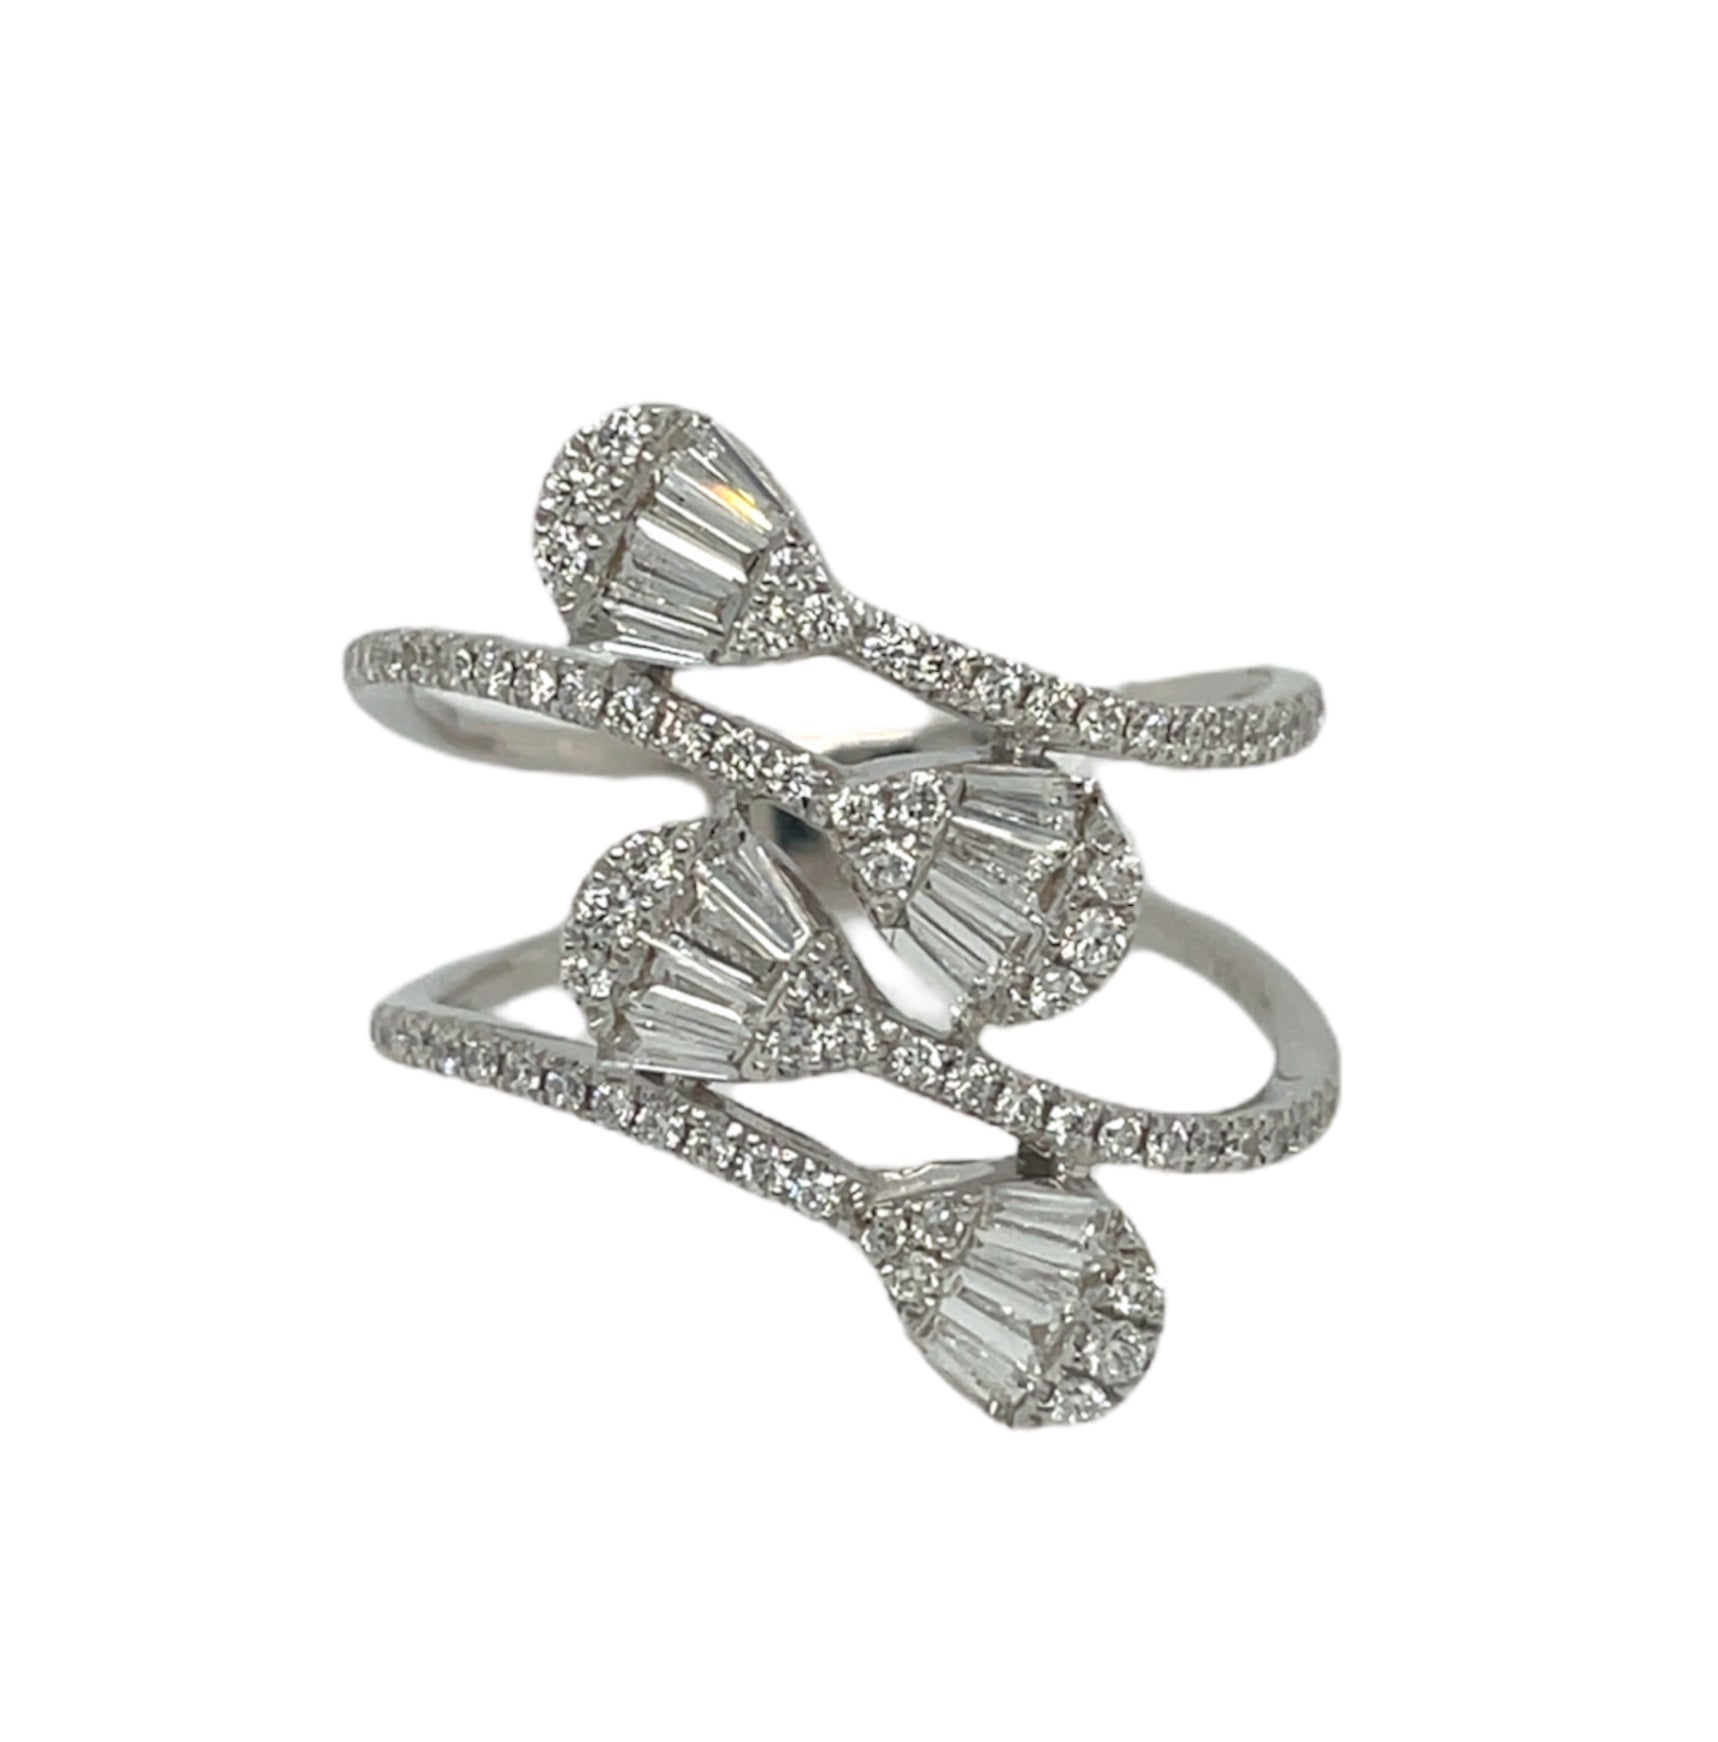 Diamond Cocktail Ring ZigZag Pear Shape 0.88 Carats 14KT White Gold